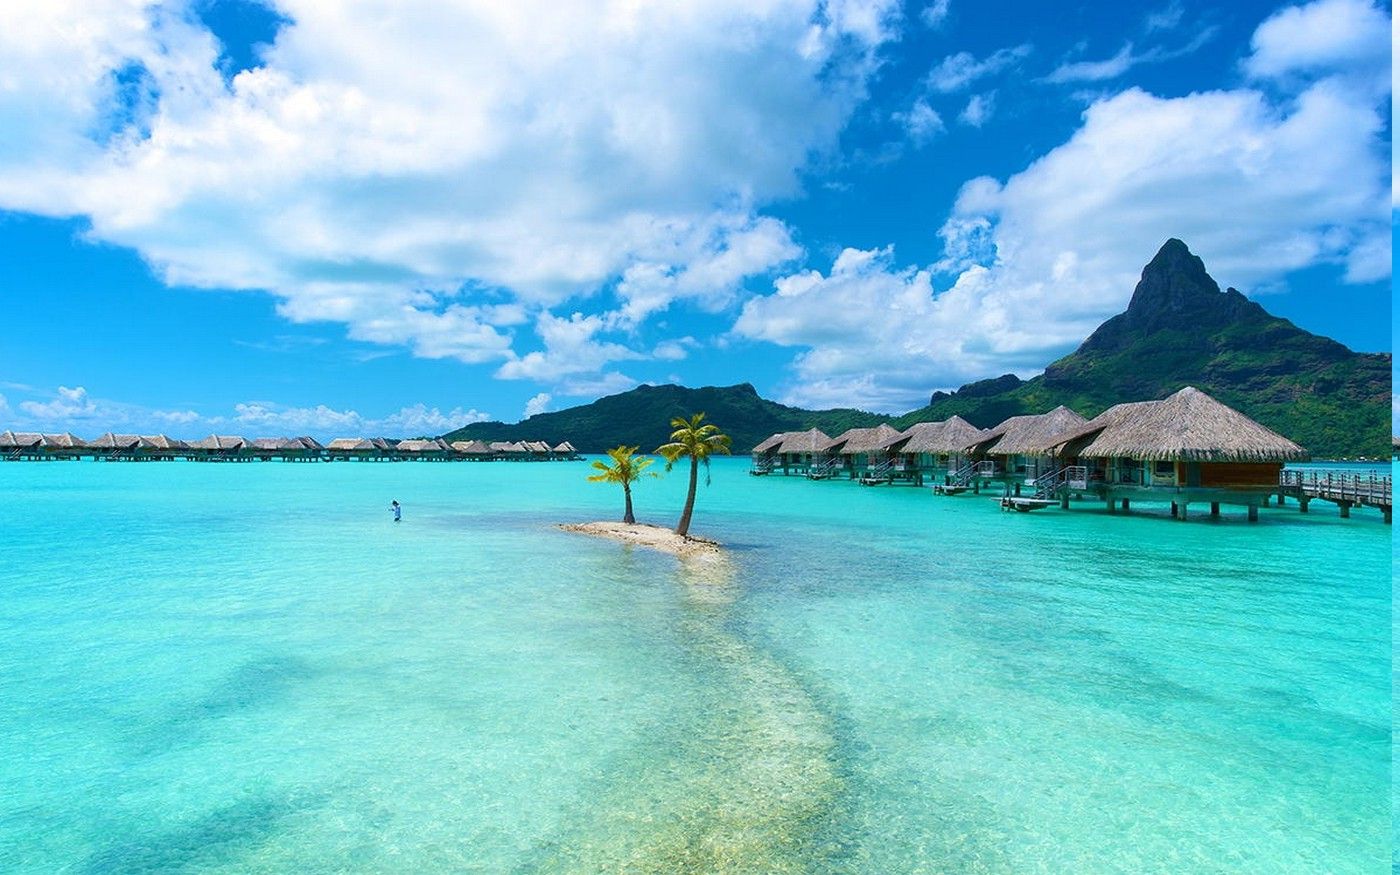 253692-nature-landscape-Bora_Bora-resort-island-tropical-sea-beach-palm_trees-clouds-mountain-turquoise-water-bungalow-summer-Vacations.jpg